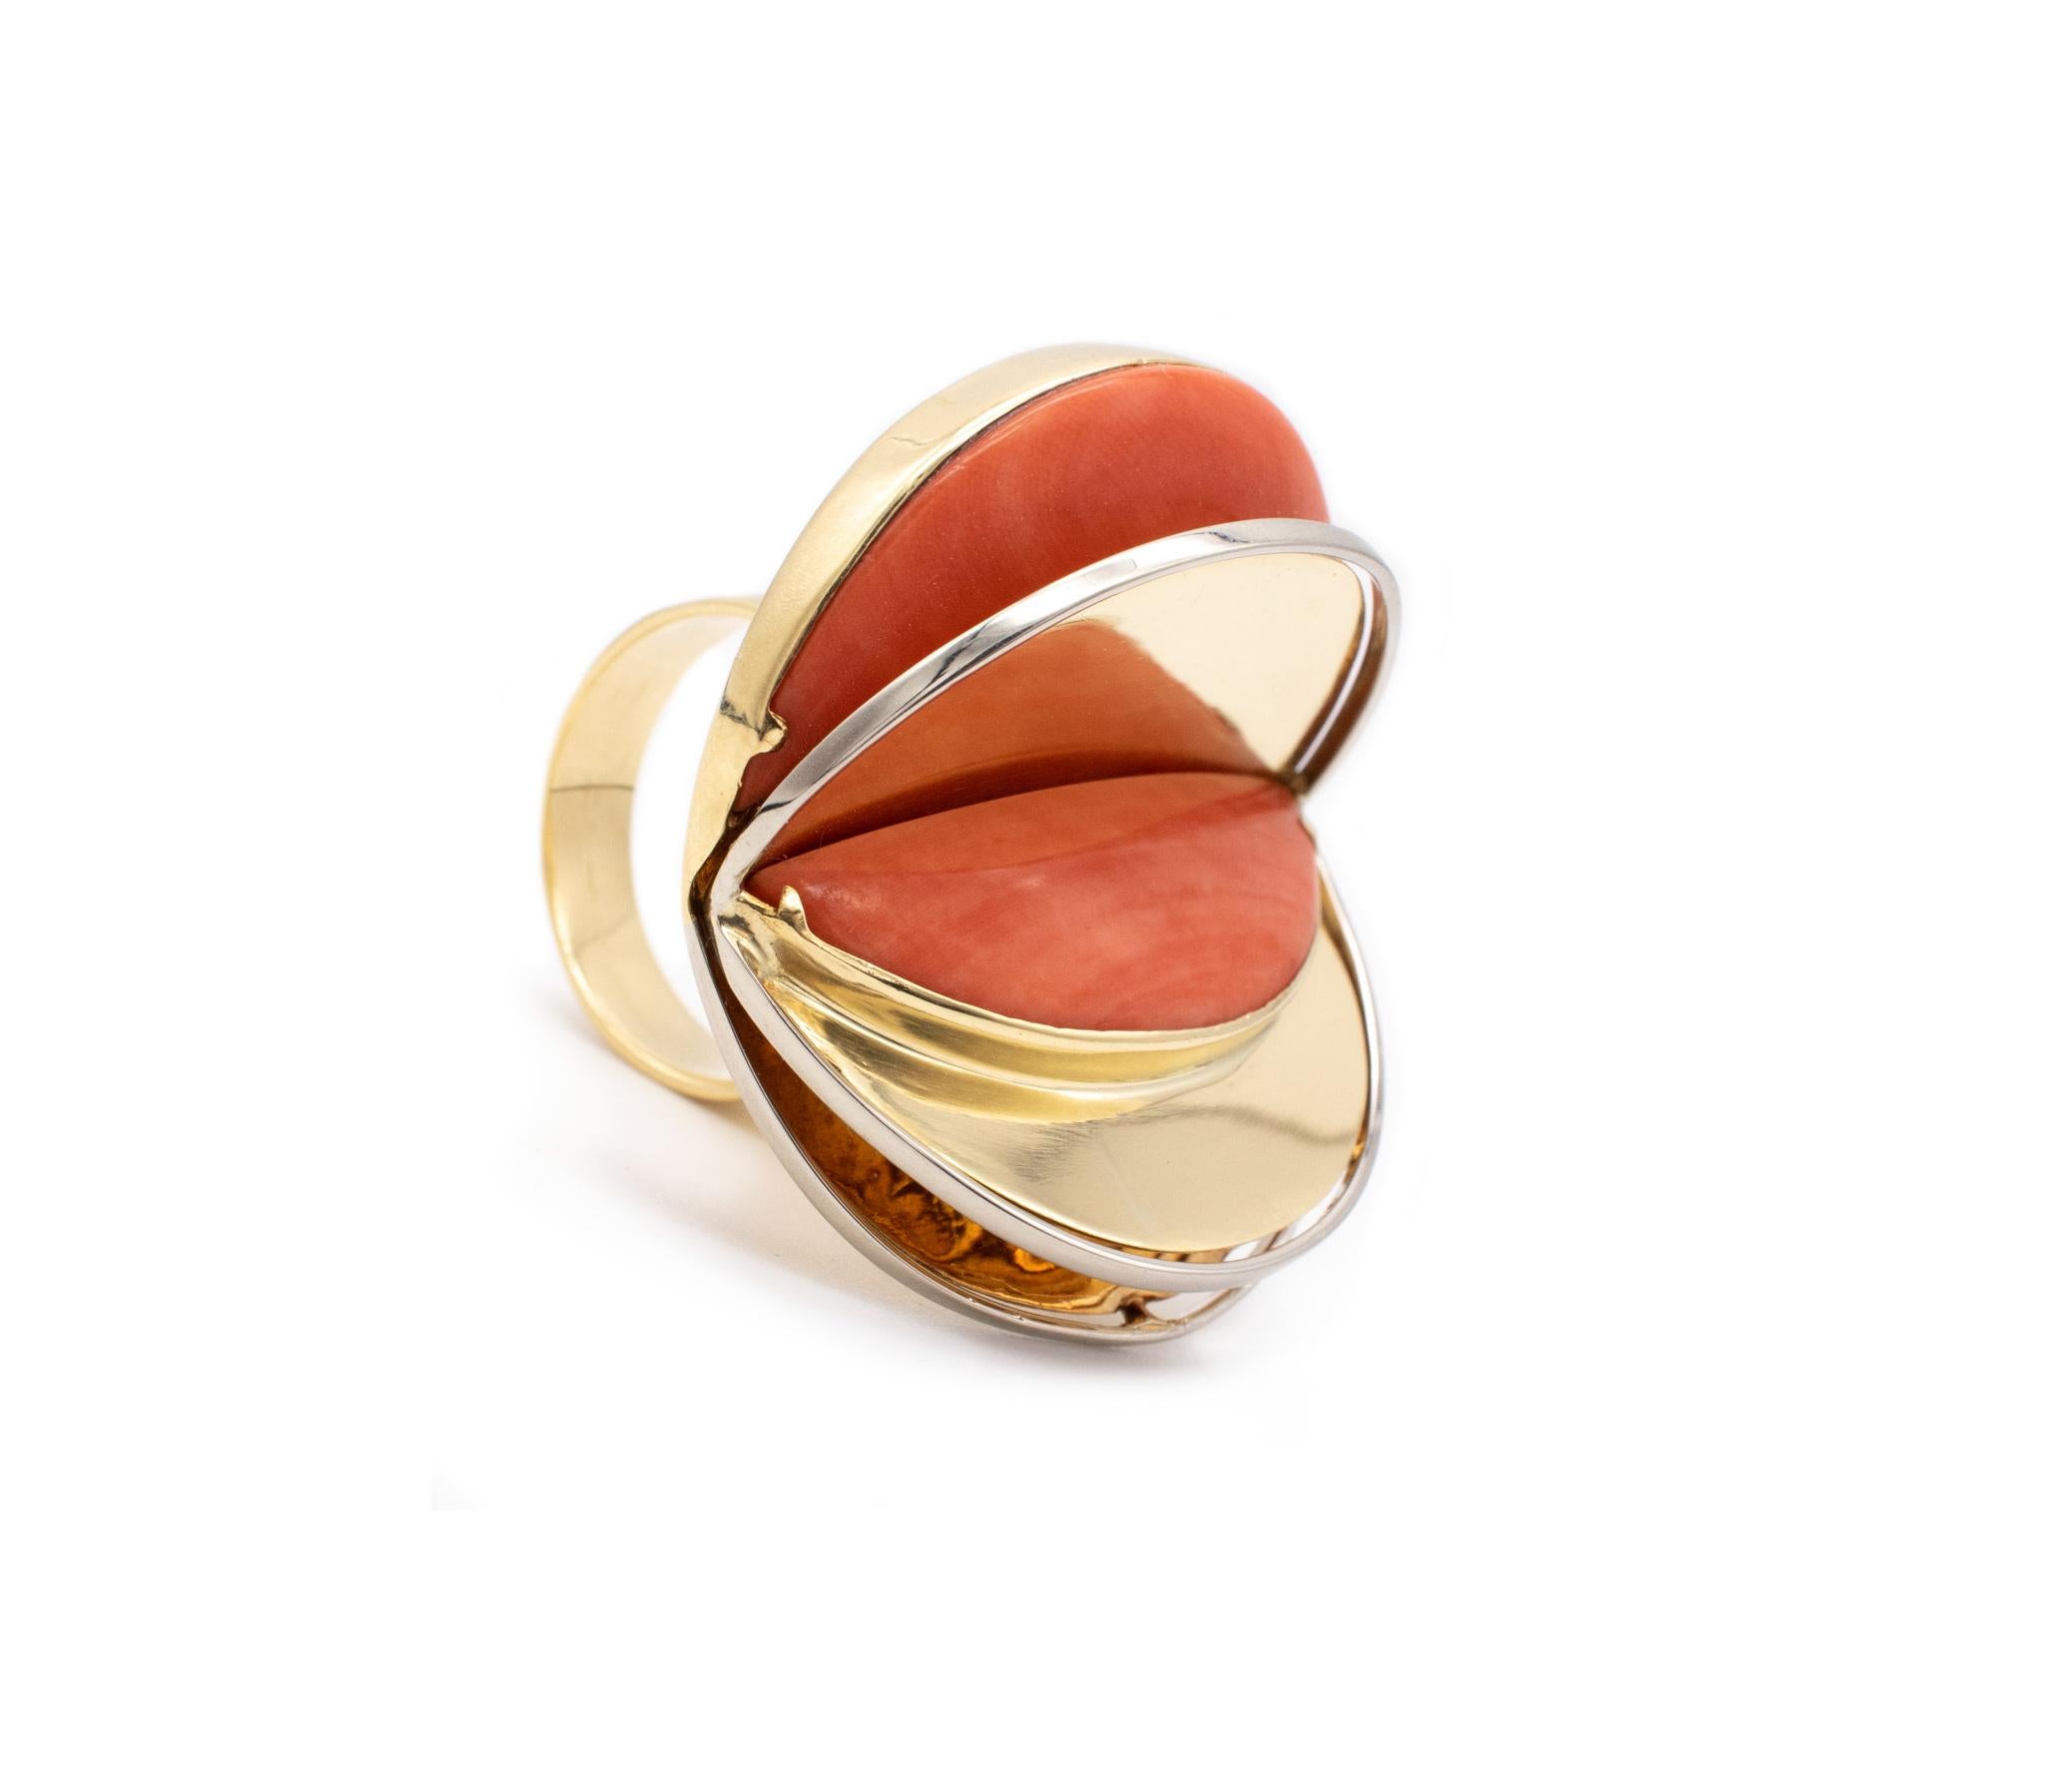 Geometric OP-Art ring designed by Laura Rivalta (Valenza 1933-).

Modernist sculptural OP-Art piece, made as a wearable ring by the artist-jeweler, Laura Rivalta.

This ring has been made around the 1980 in Valenza, Italy and constructed in solid